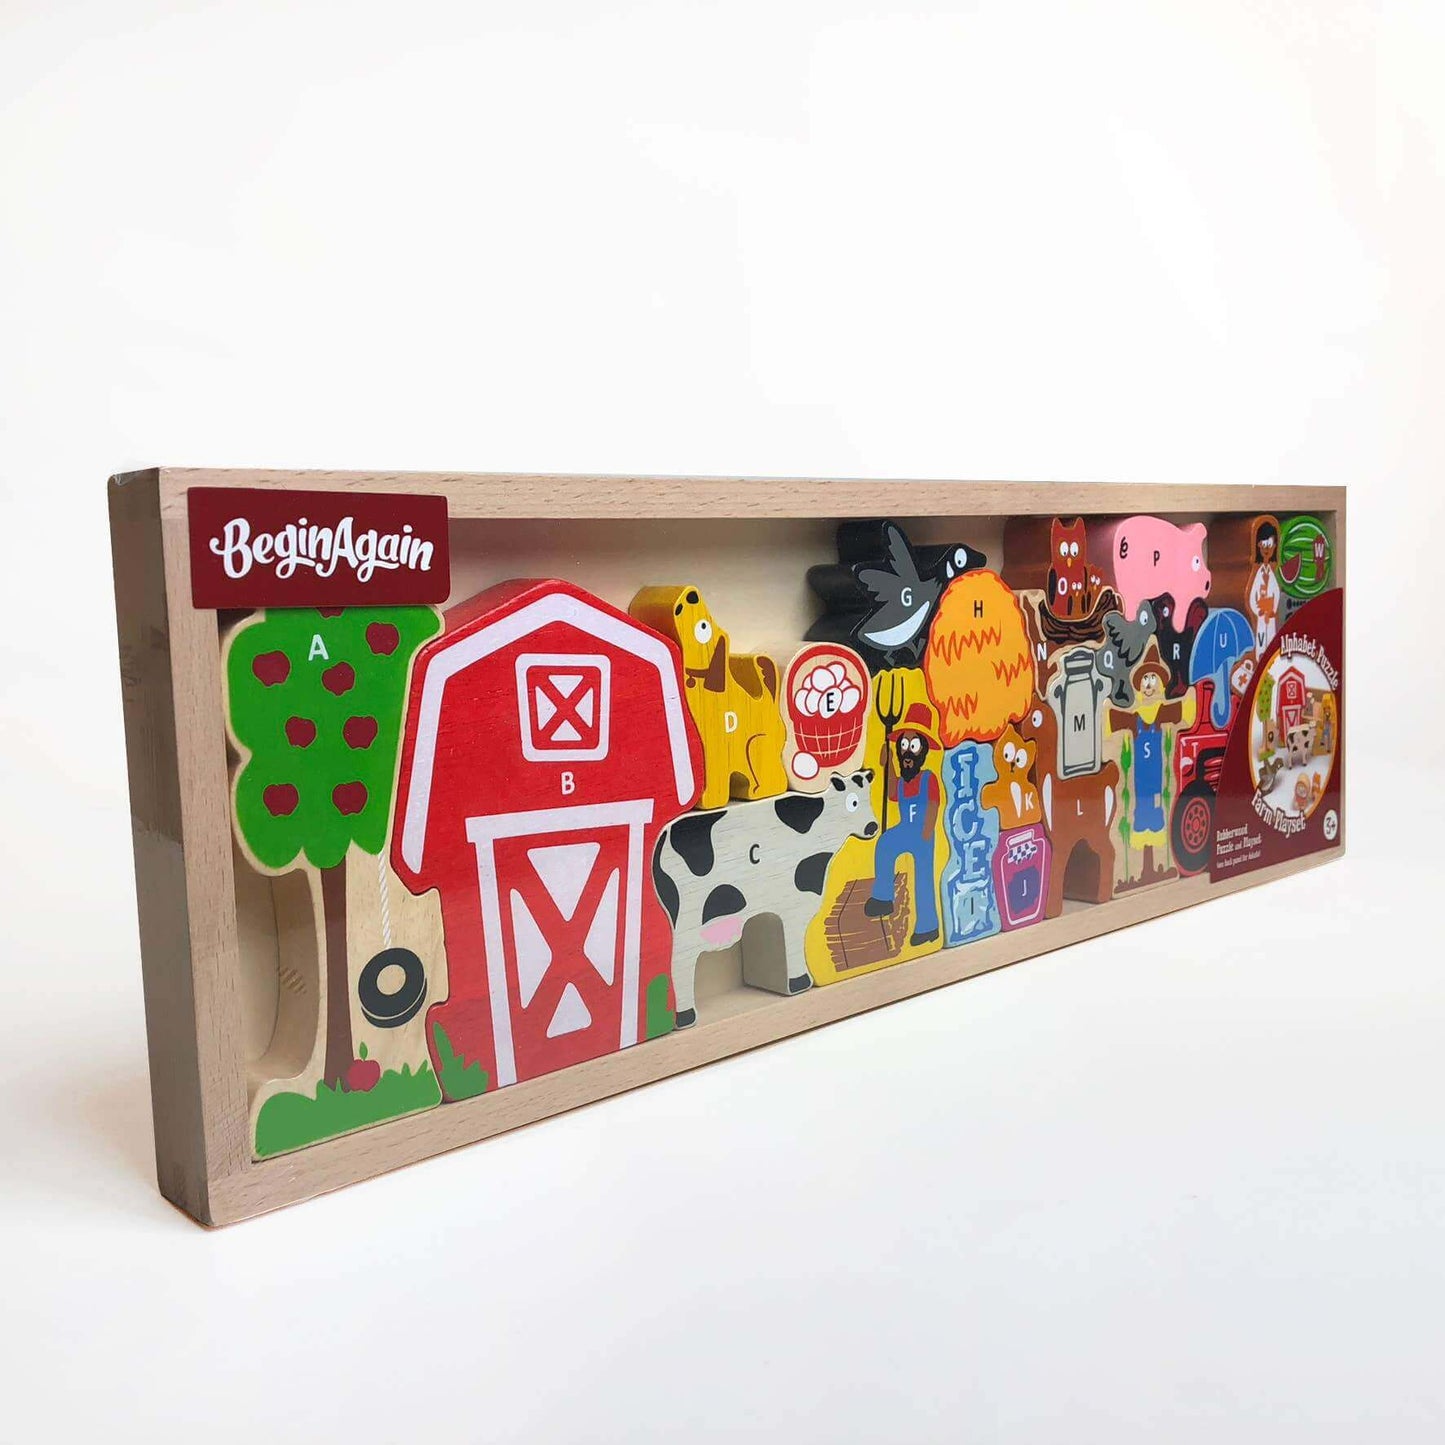 Farm A to Z Puzzle and Playset, Begin Again, eco-friendly Toys, Mountain Kids Toys